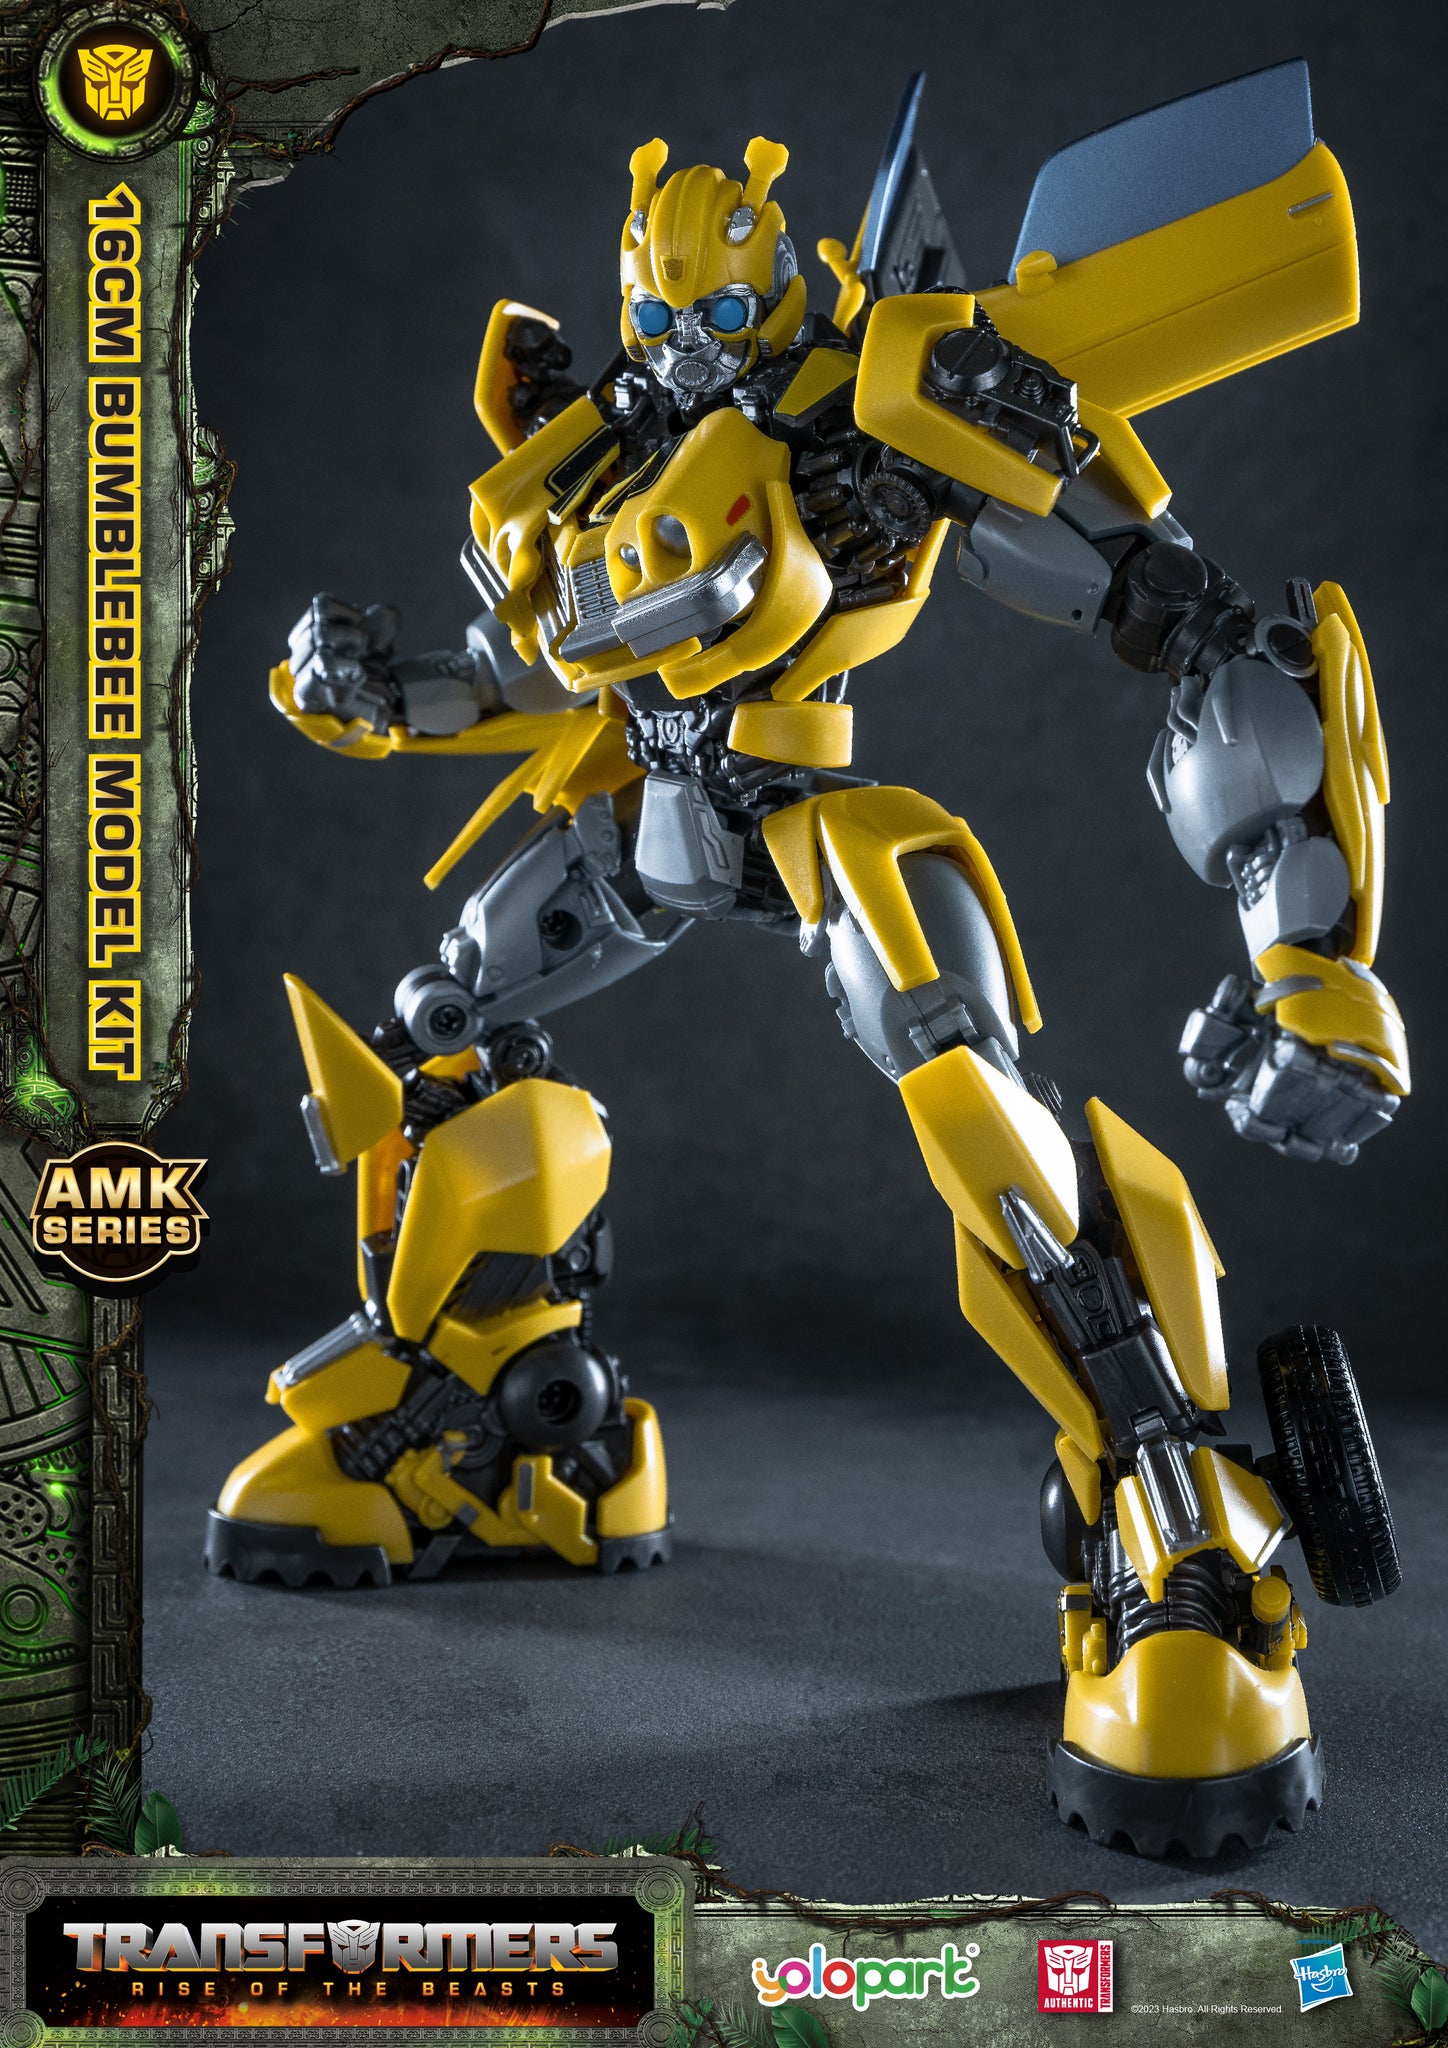 Yolopark Rise Of The Beasts Model Kits, Page 95